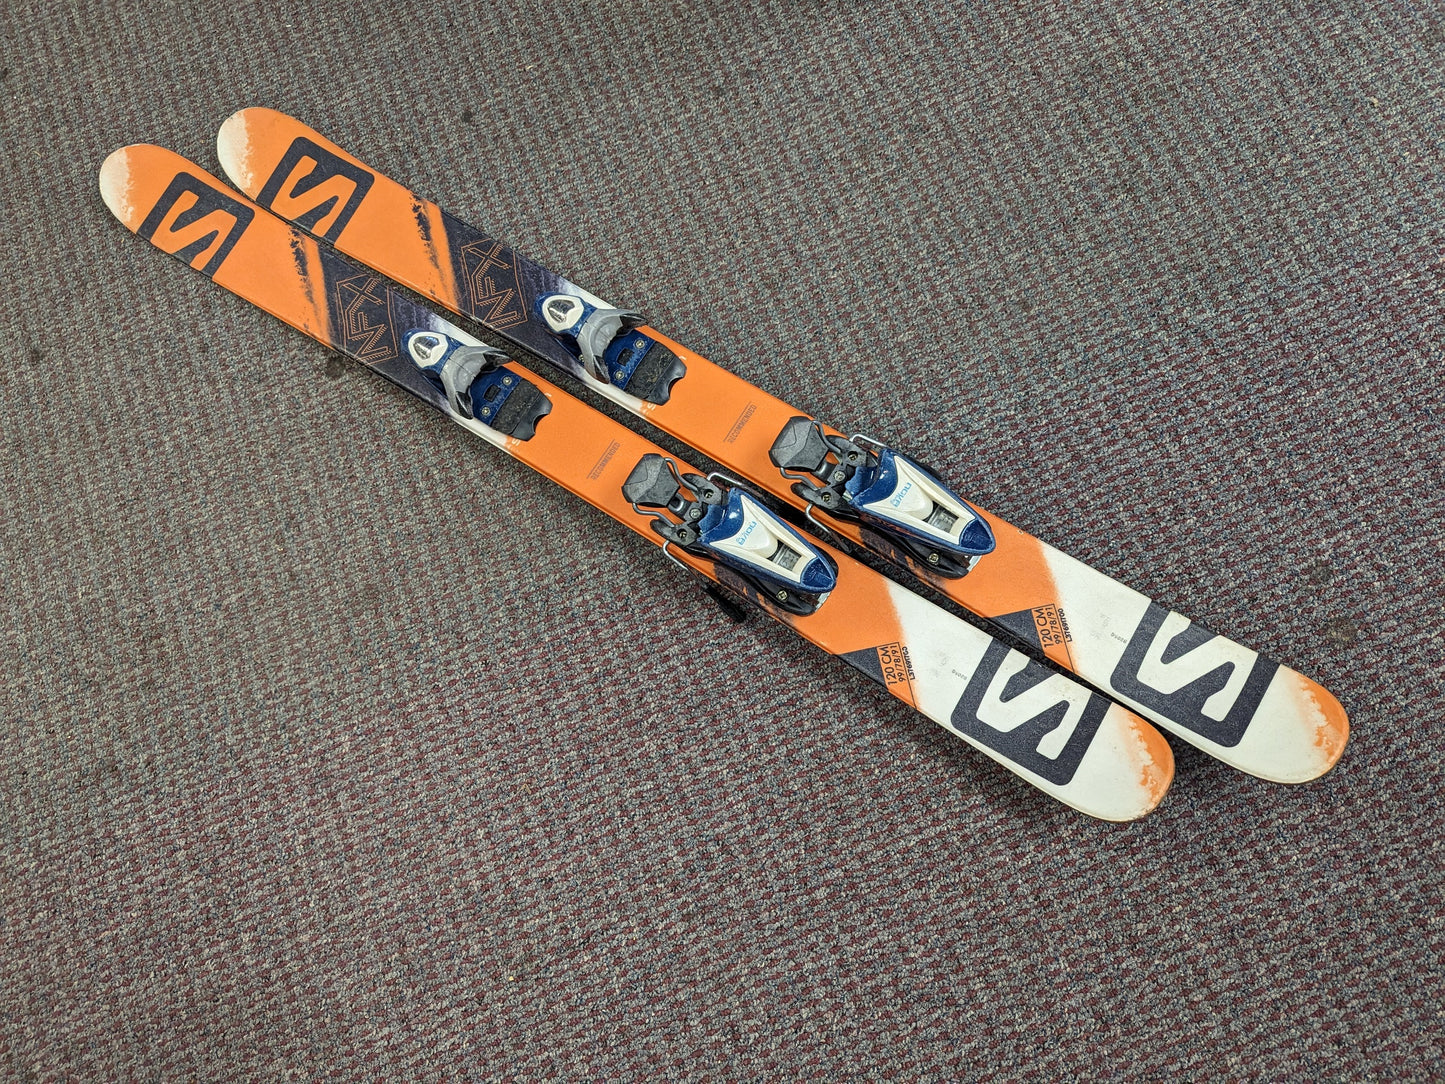 Salomon NFX Twin Tip Skis w/Look Bindings Size 120 Cm Color Orange Condition Used